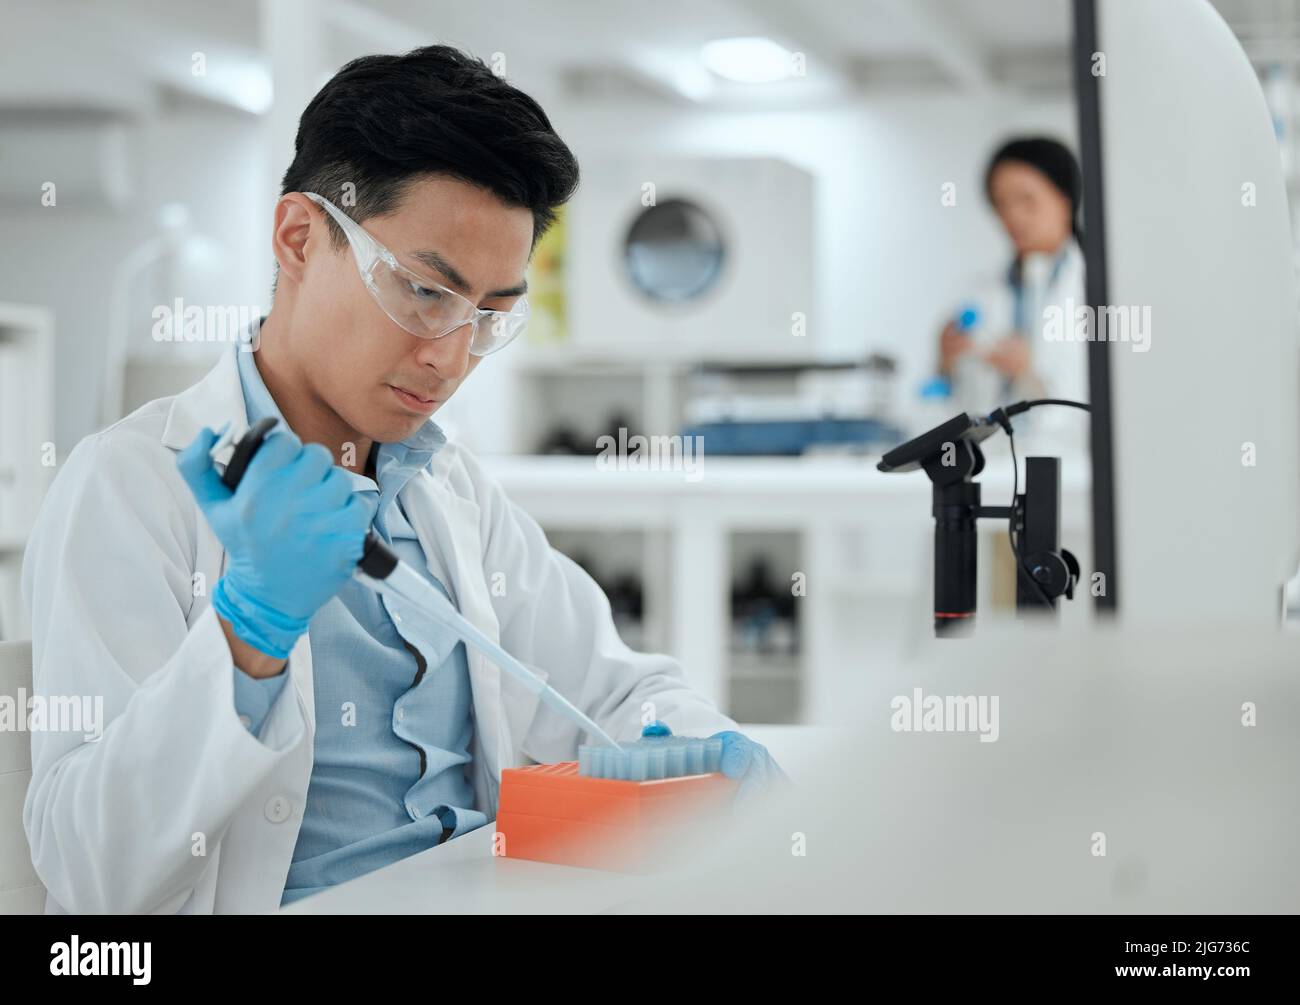 Being careful when working with samples. Shot of a young man filling a test tube samples. Stock Photo